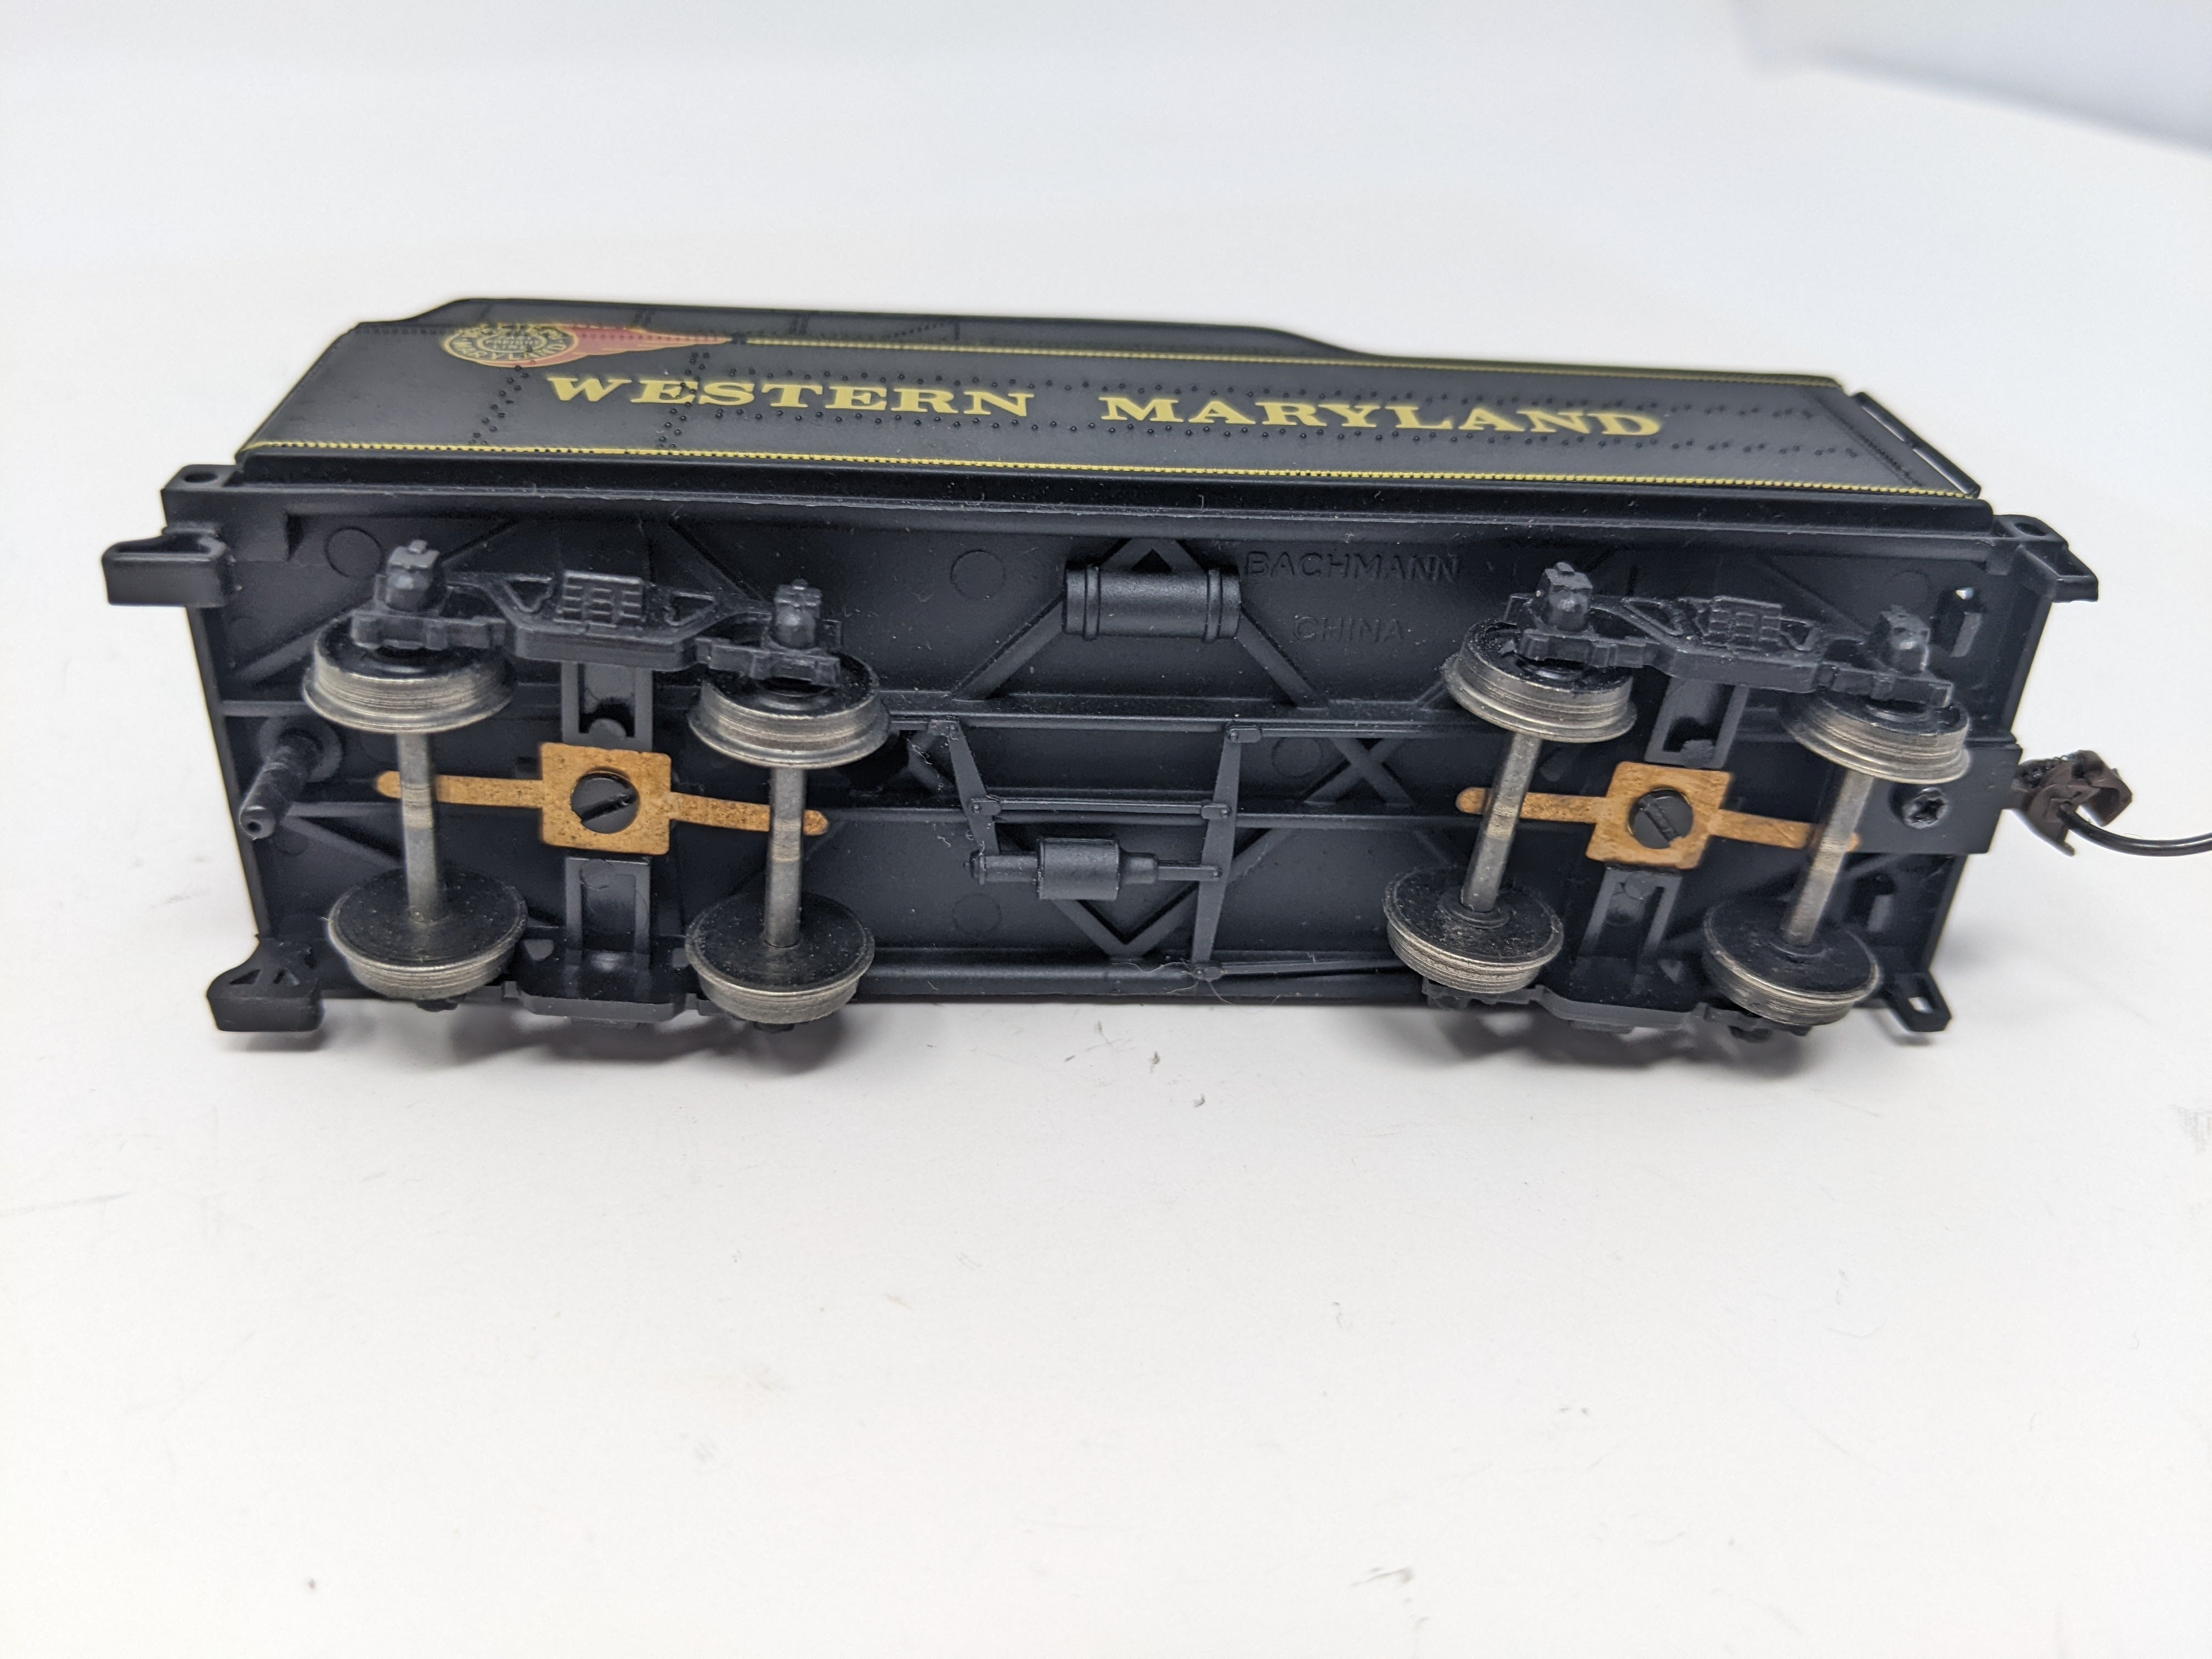 USED Bachmann HO Scale, Tender Only, Western Maryland #763, Fireball